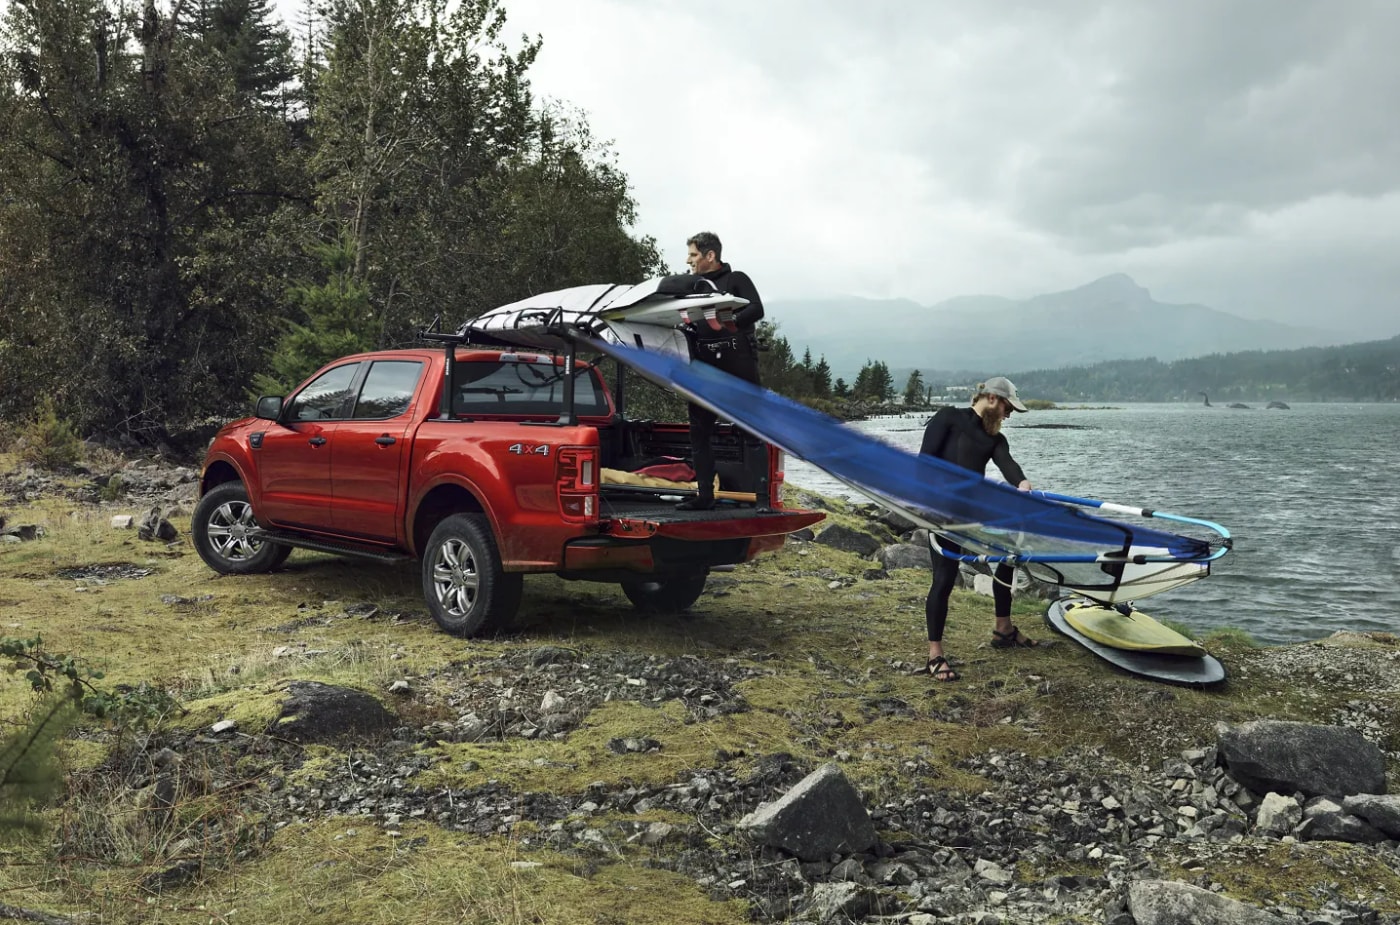 Two men unload windsurfing gear from a red 2023 Ford Ranger parked near a lake